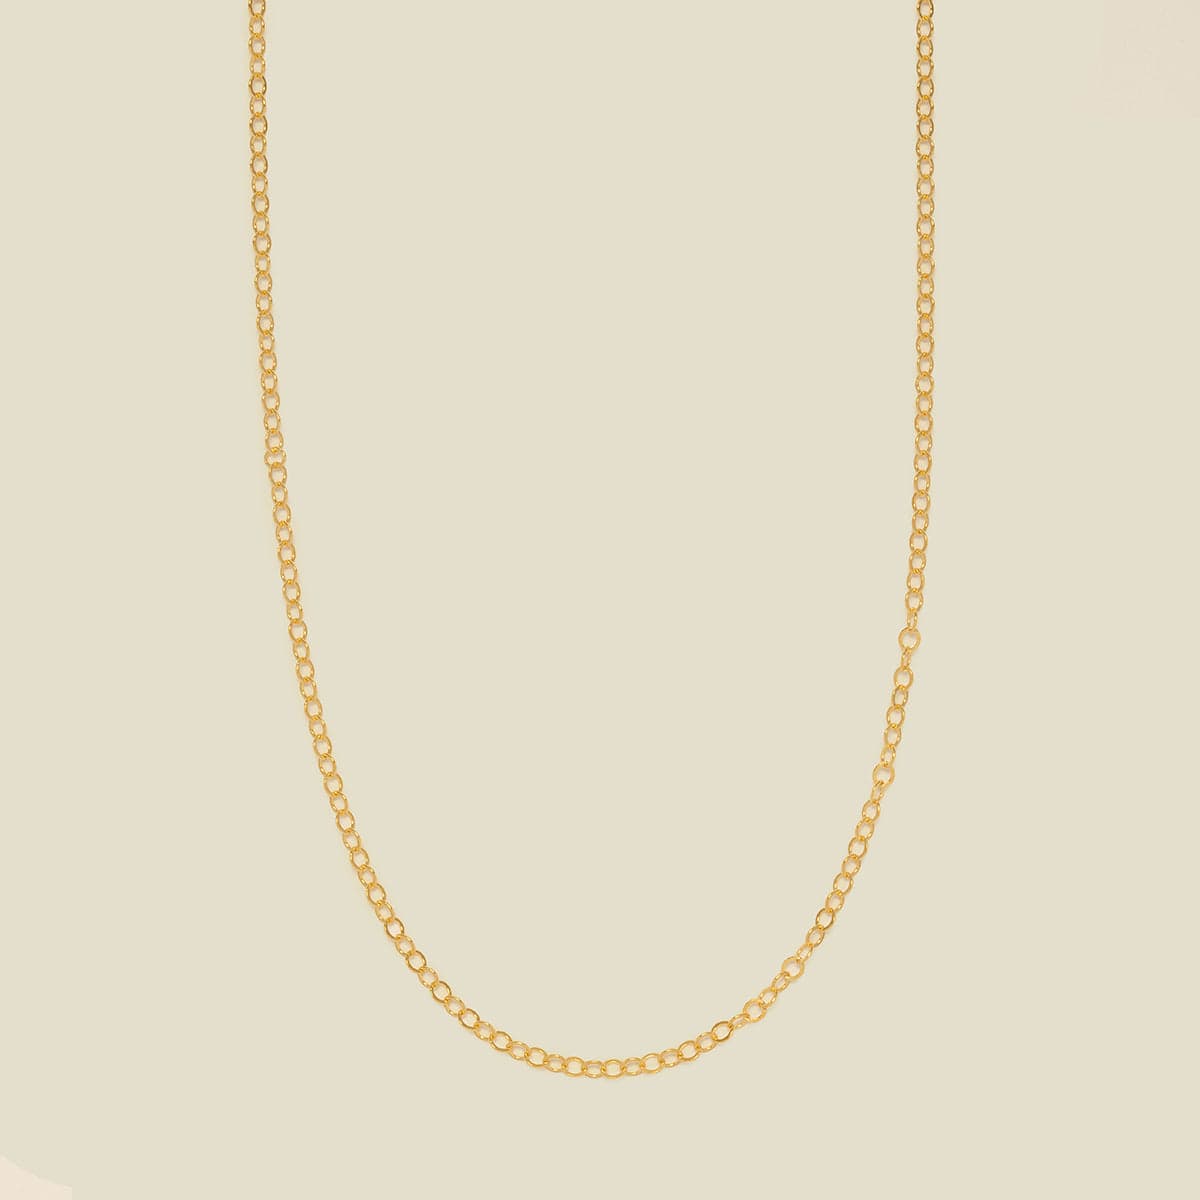 Non-Adjustable Flat Cable Chain | Final Sale Gold Filled / 1.8mm / 16" Necklace